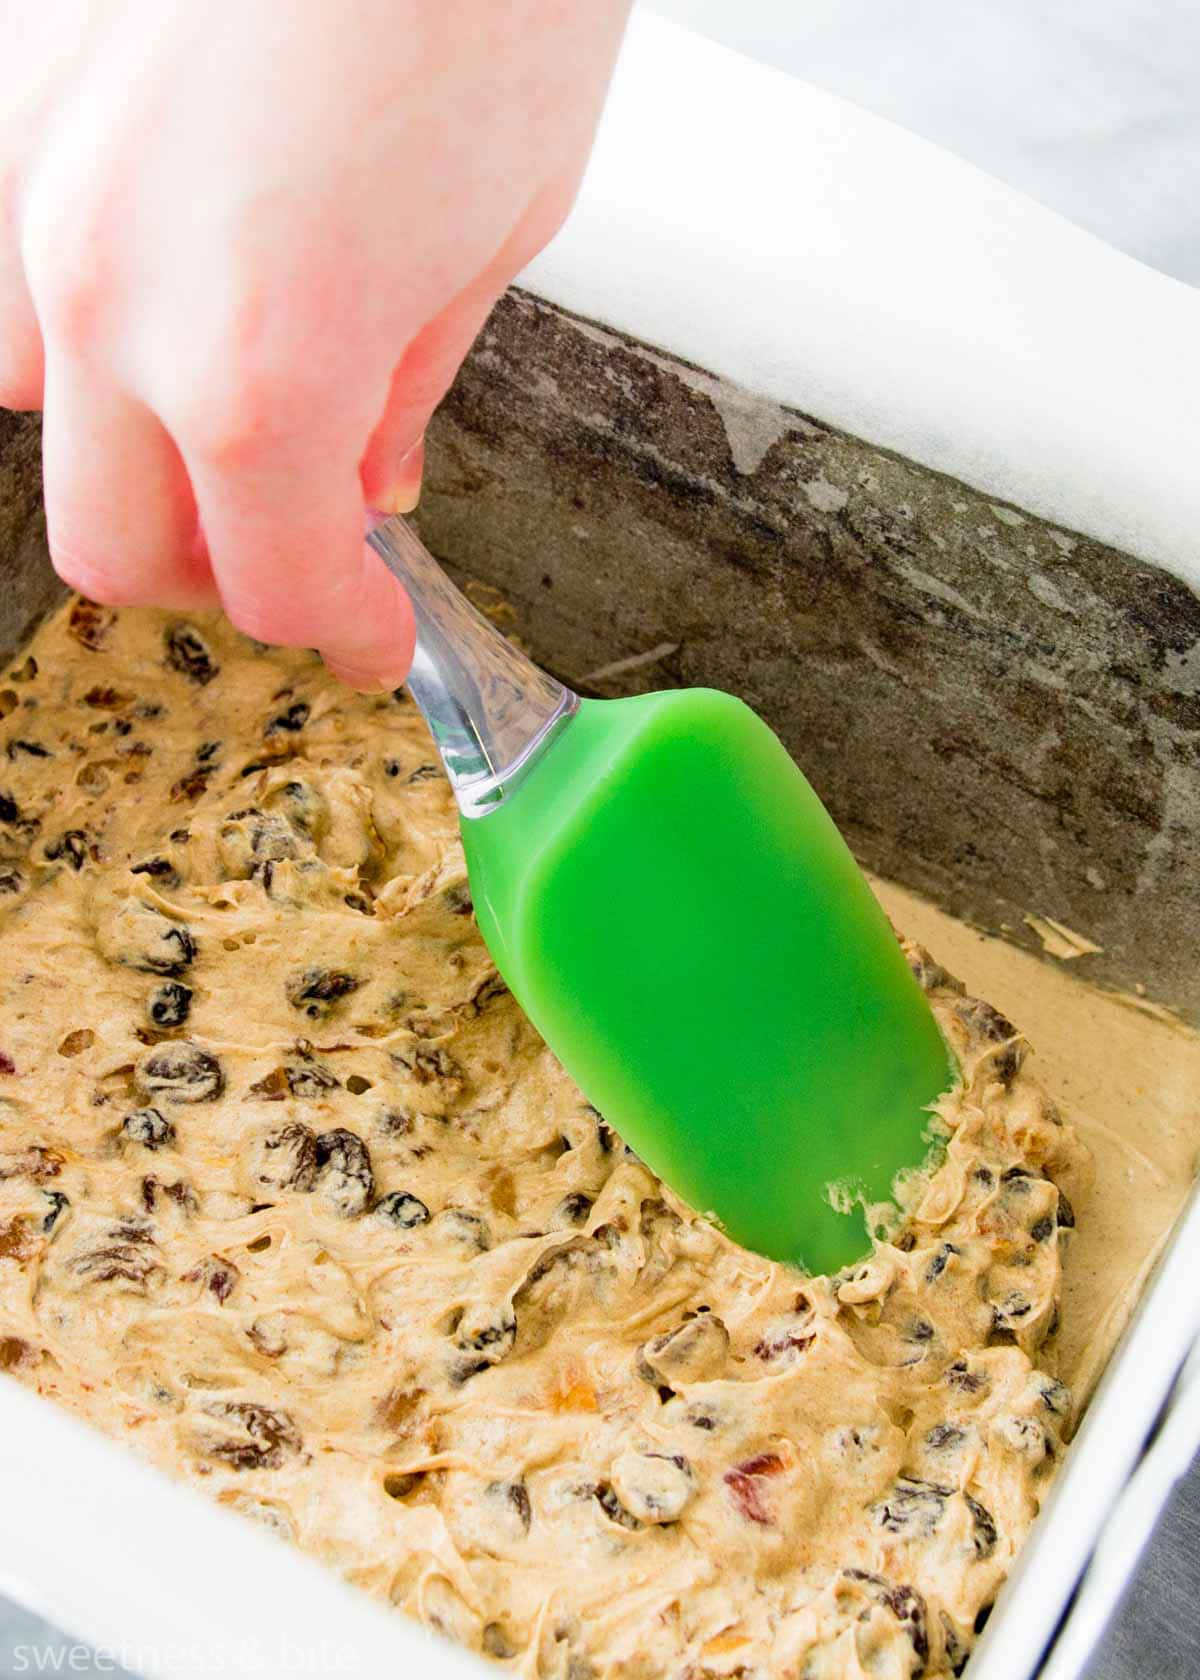 Fruit cake batter being pressed into the prepared cake pan with the back of a spatula.